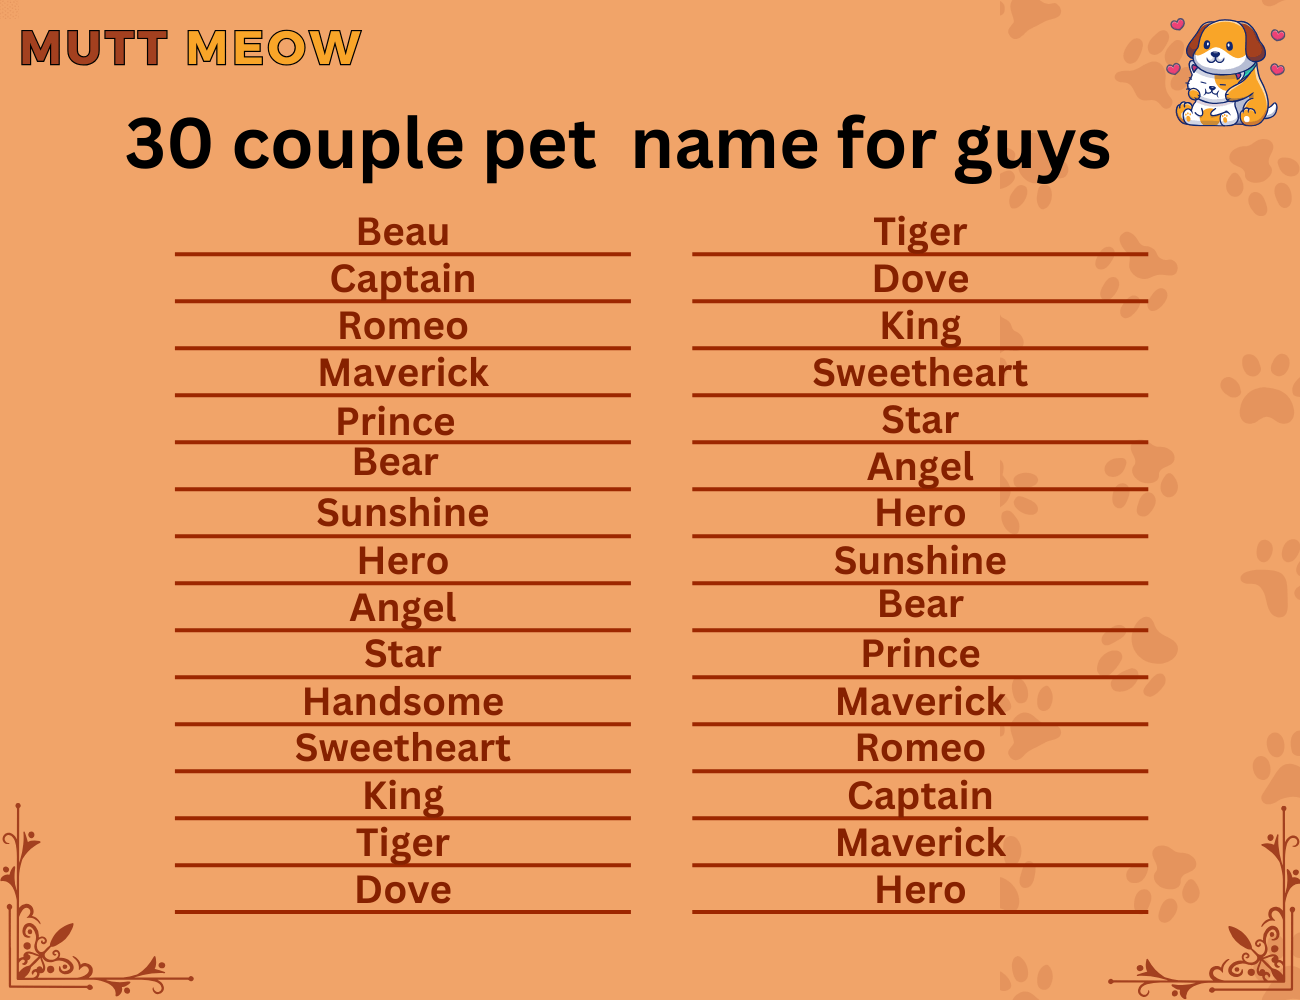 30 couple pet names for guys